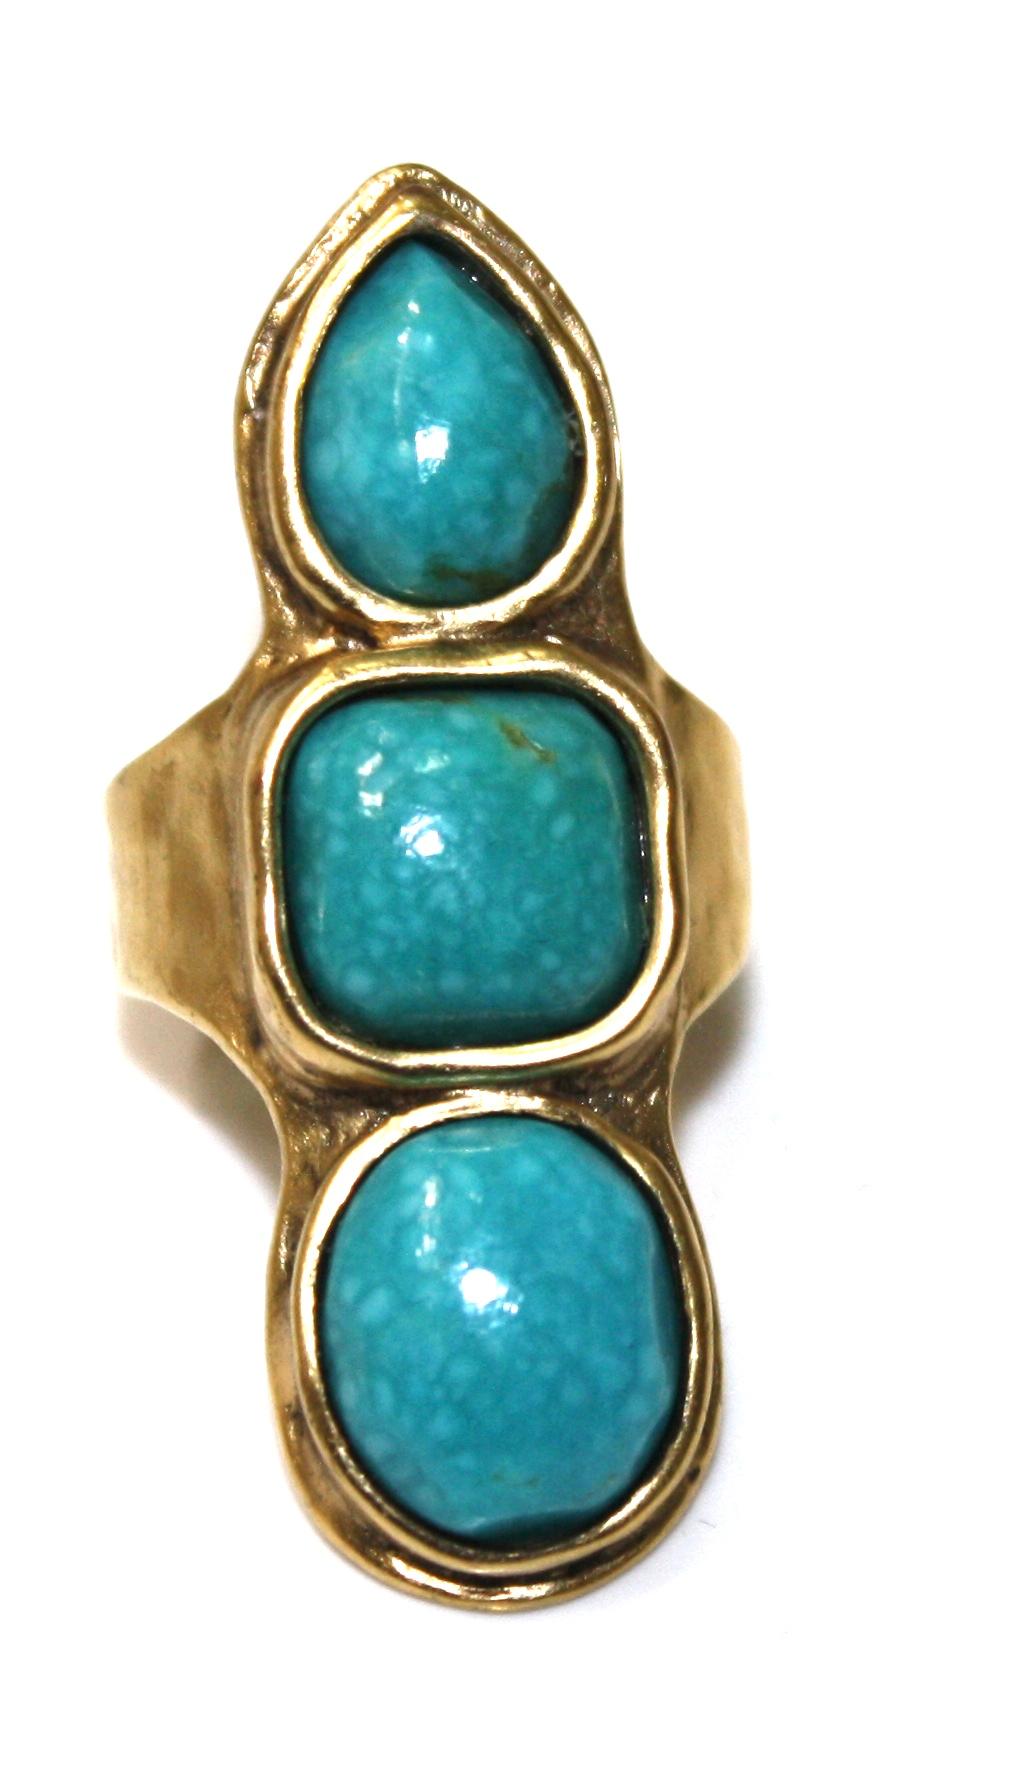 3 turquoise Cabochons set on 24Kt gilded bronze. Ring is a size 6 or 53 in France